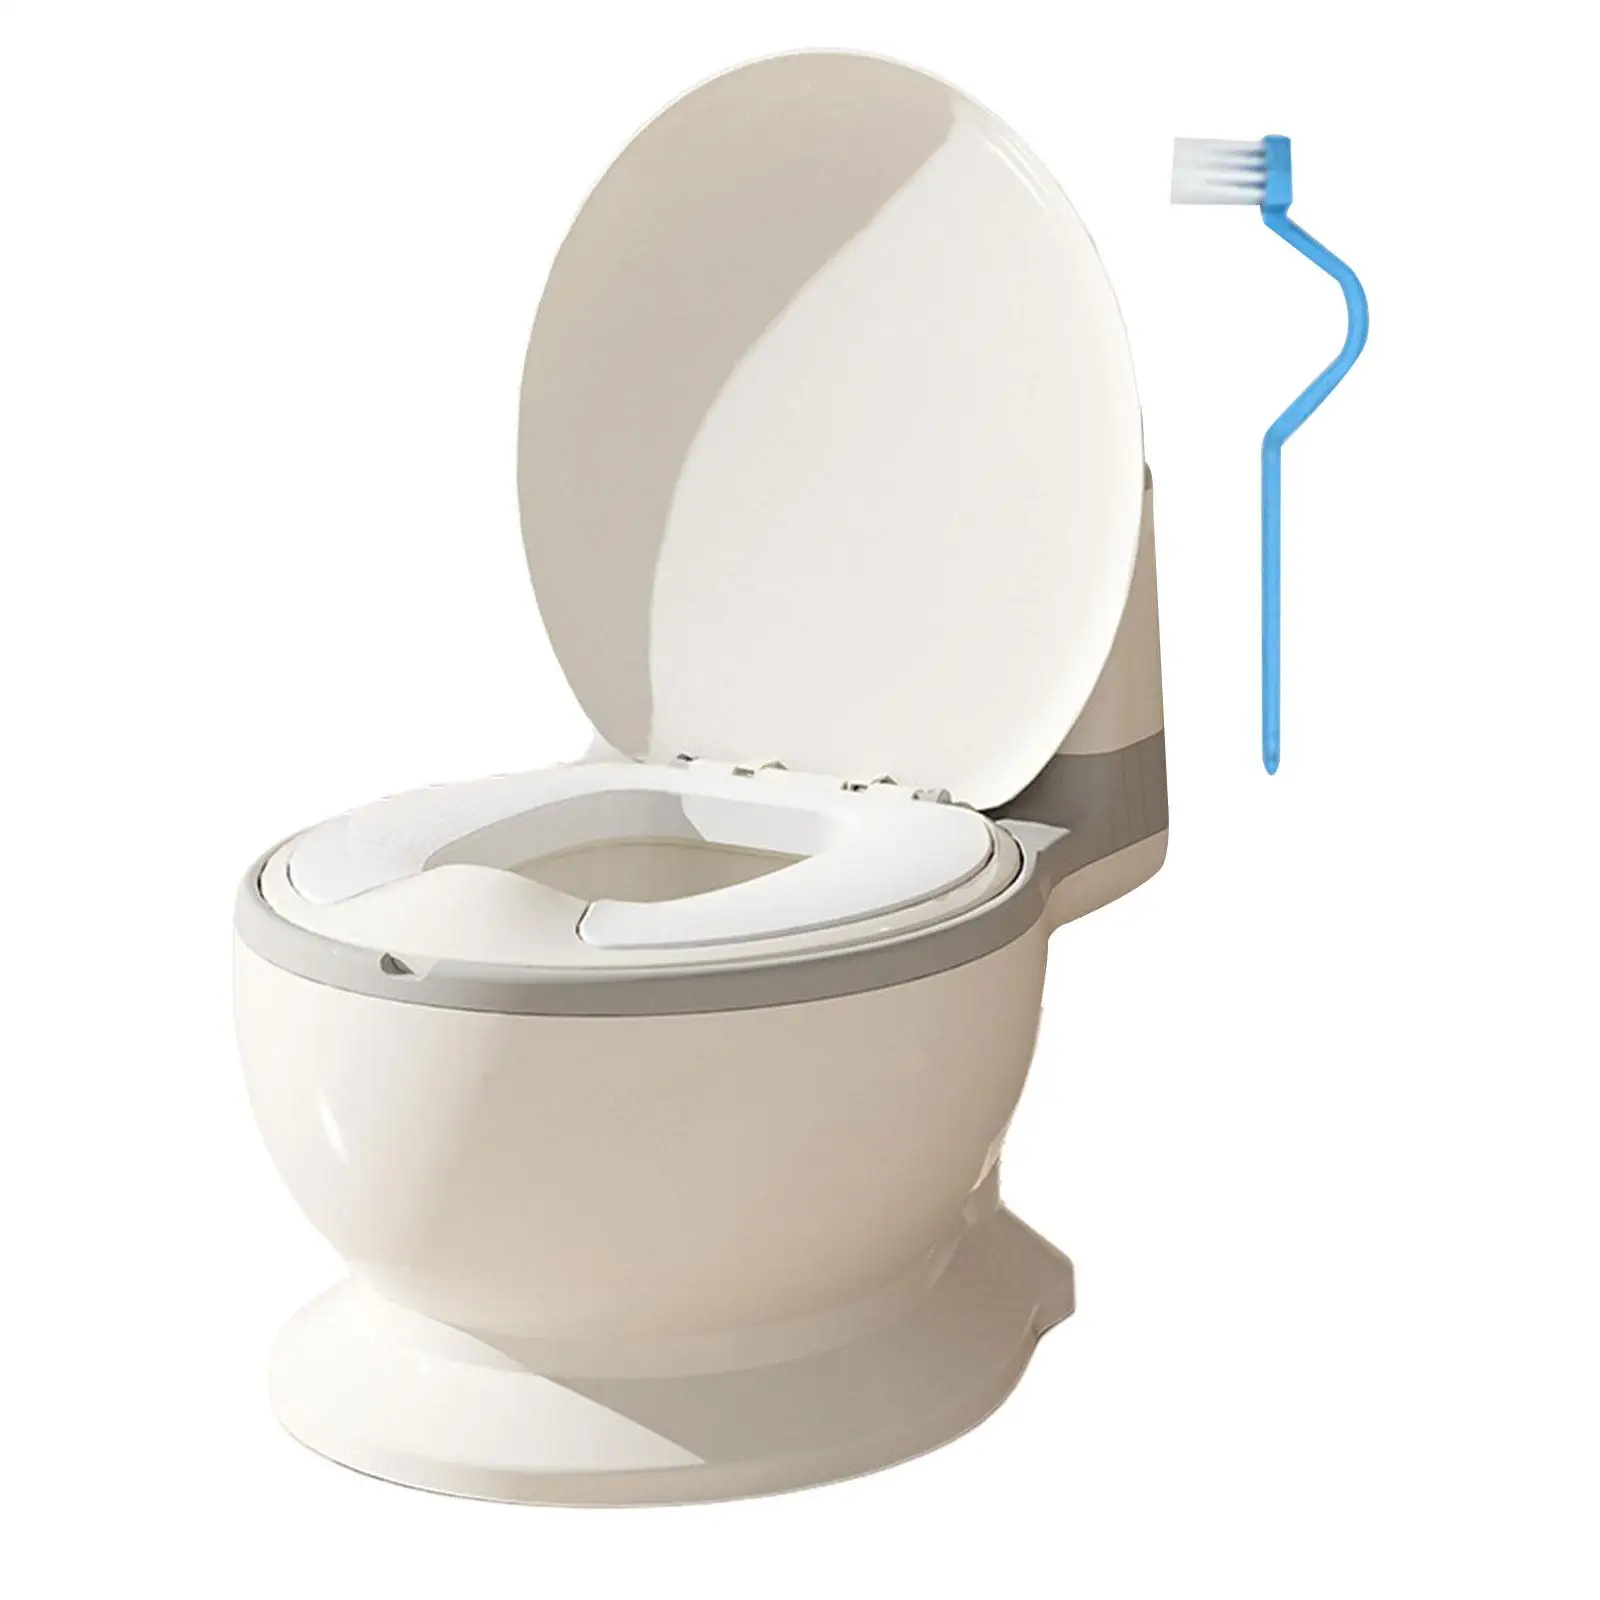 Baby Potty Toilet with Wipe Storage Includes Cleaning Brush Easily to Clean Comfortable Removable Potty Pot for Bedroom Ages 0-7